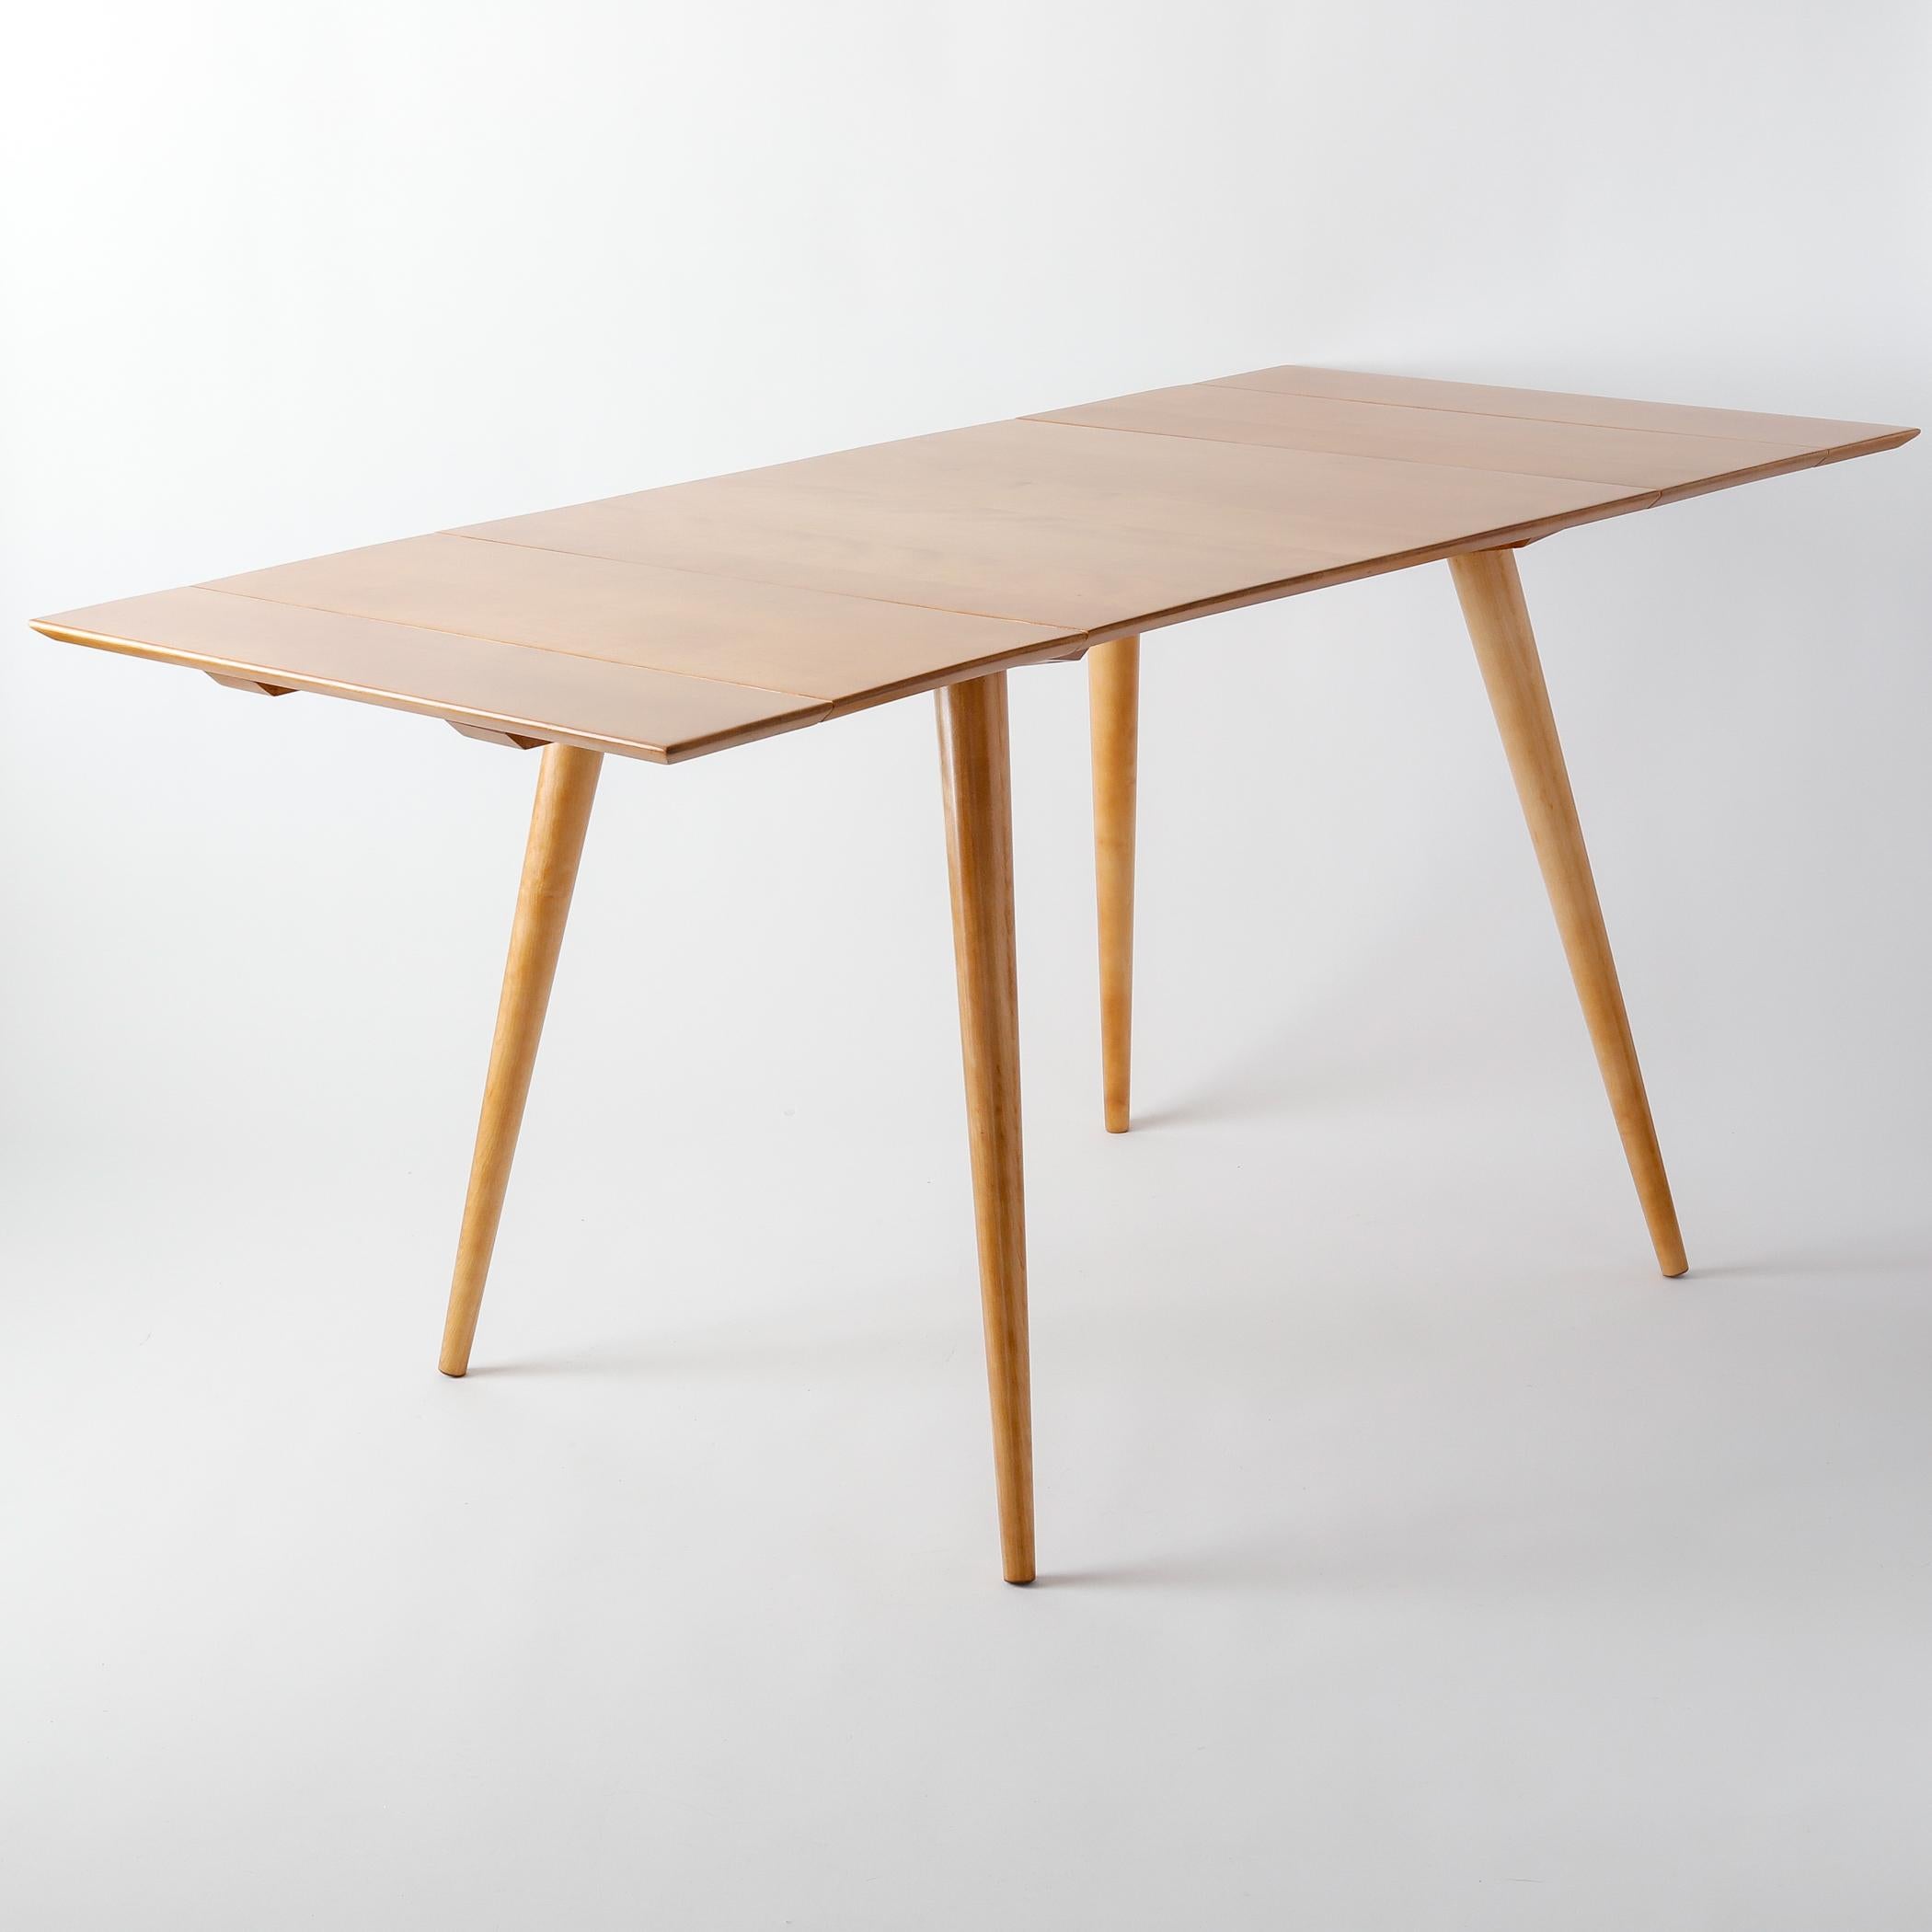 American Paul McCobb Planner Group Maple Dining Table with Two Leaves, 1950s - Breakfast 